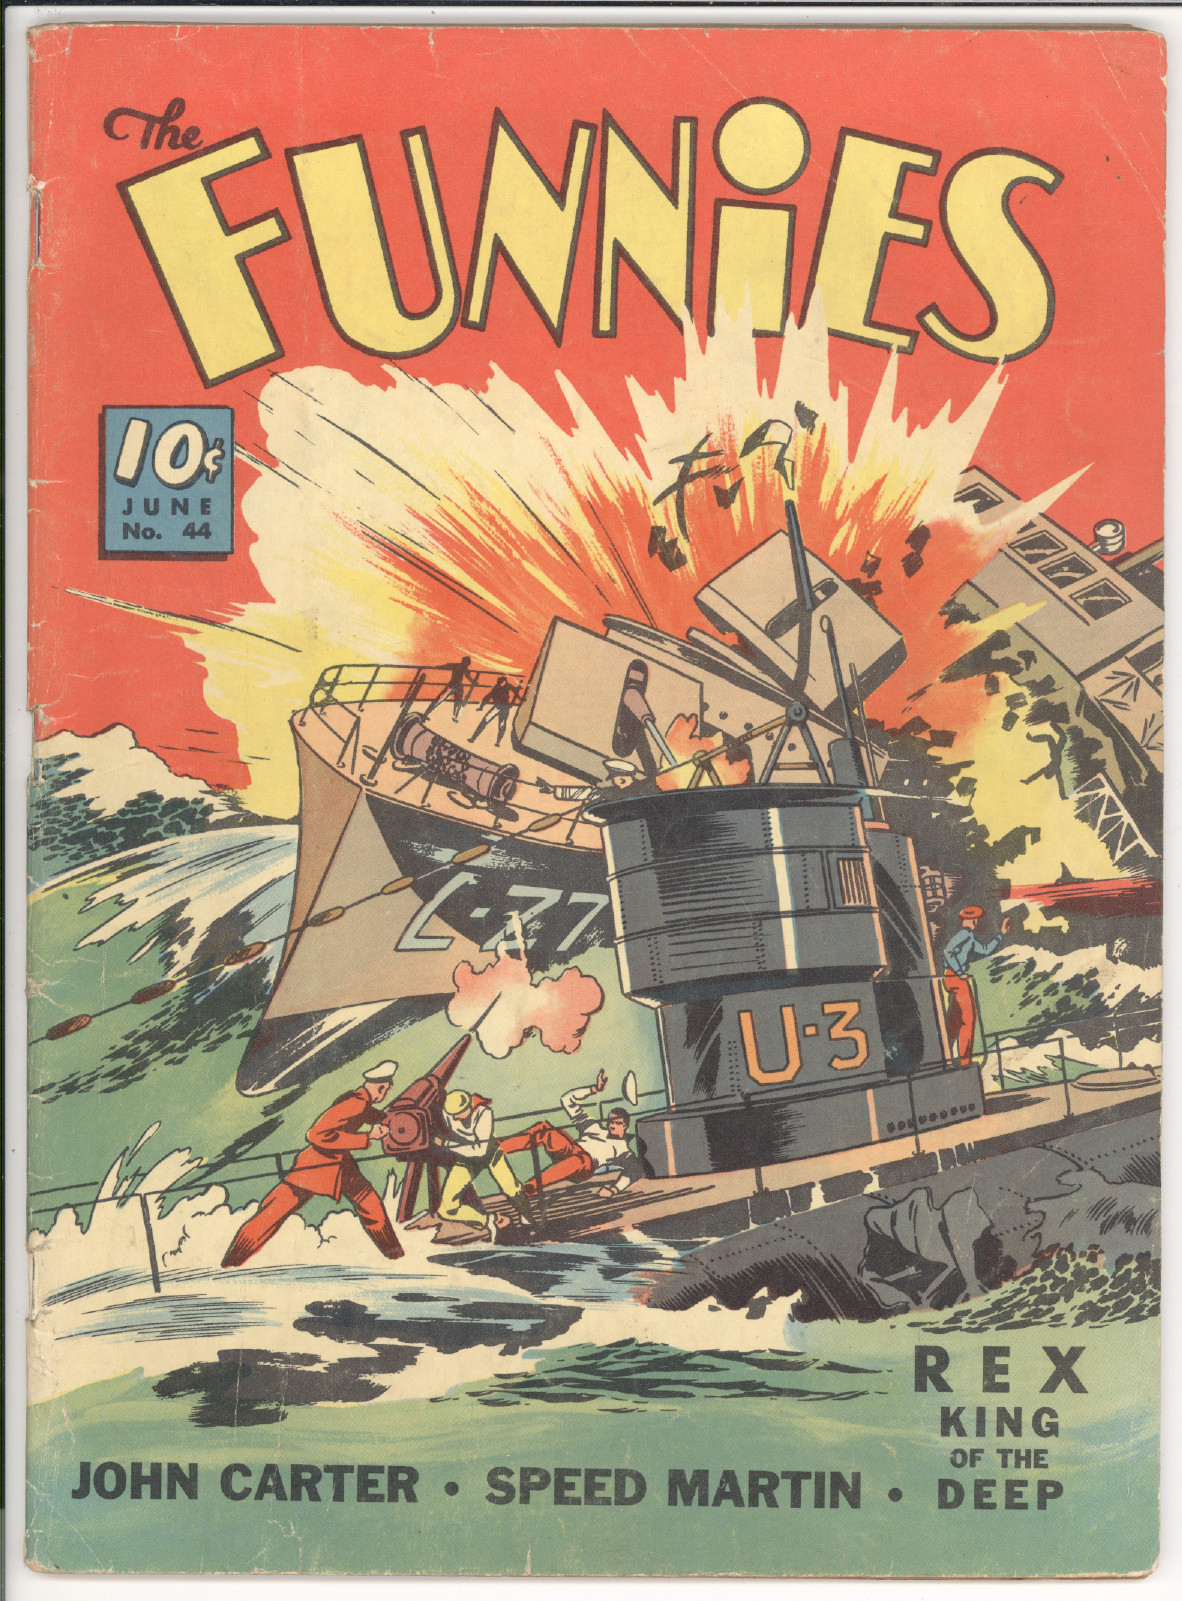 The Funnies #44 front